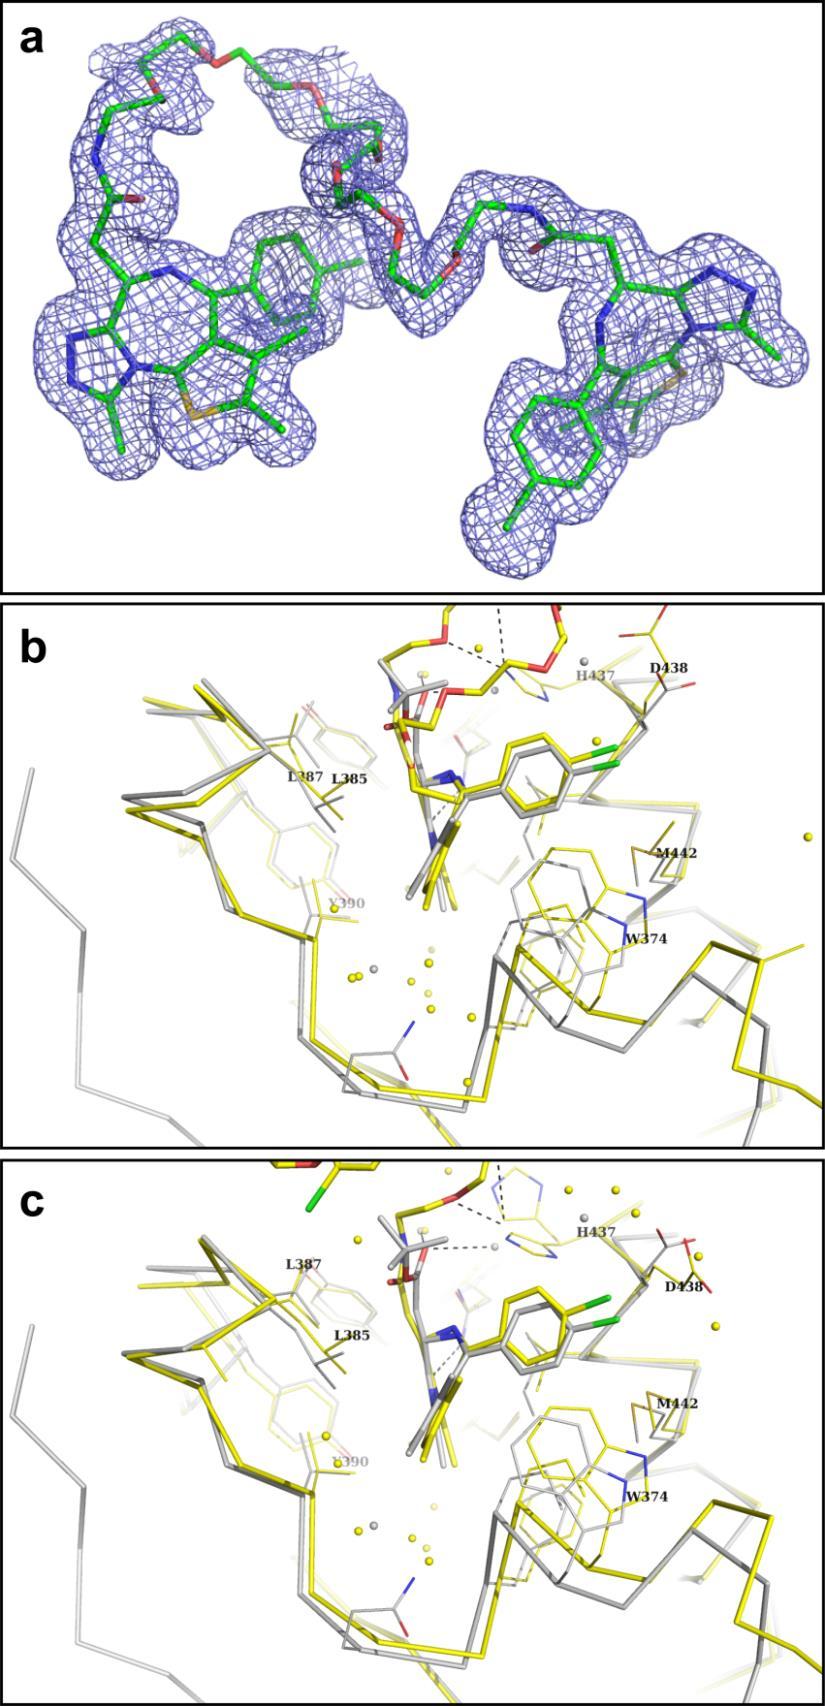 Supplementary Figure 10 Cocrystal structures of MT1 with BRD4(2). (a) An unbiased 2Fo - Fc electron density map around MT1 after the ligand was modeled with sigma level of 0.8.